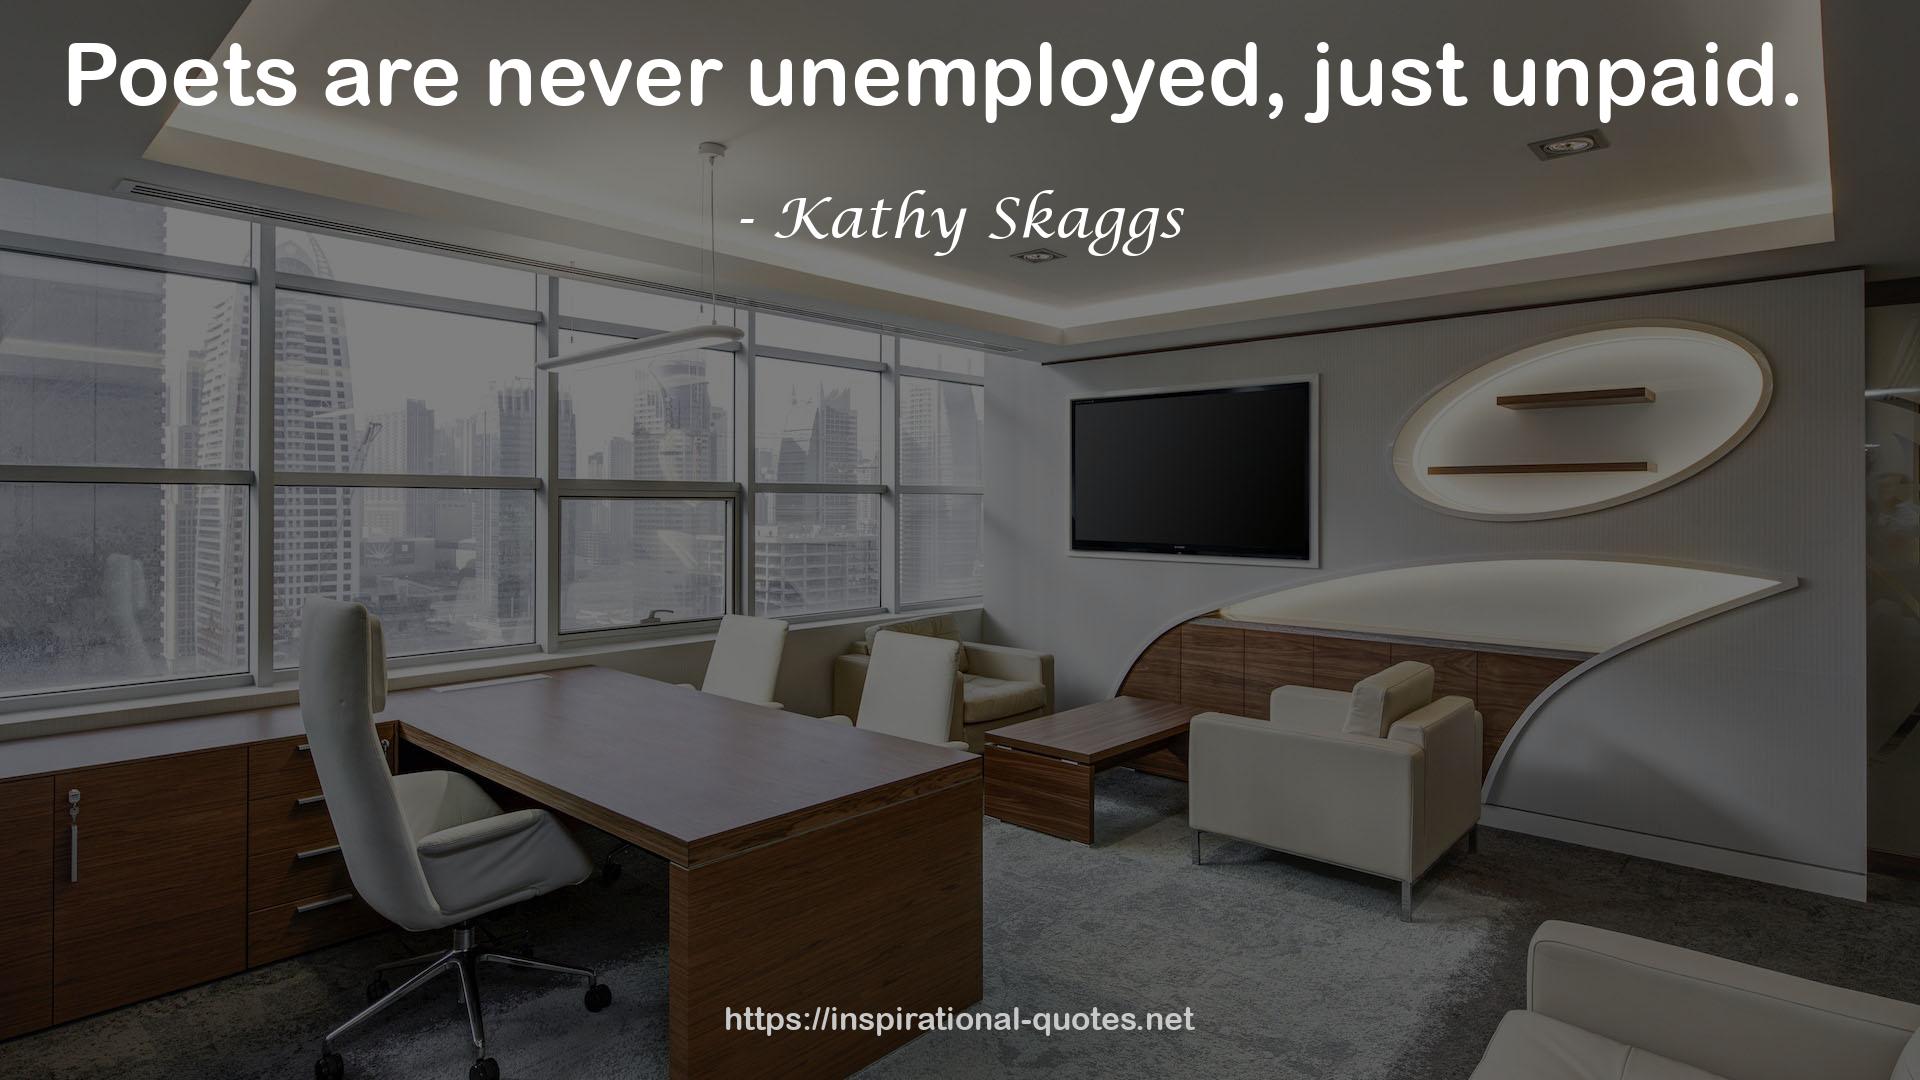 Kathy Skaggs QUOTES